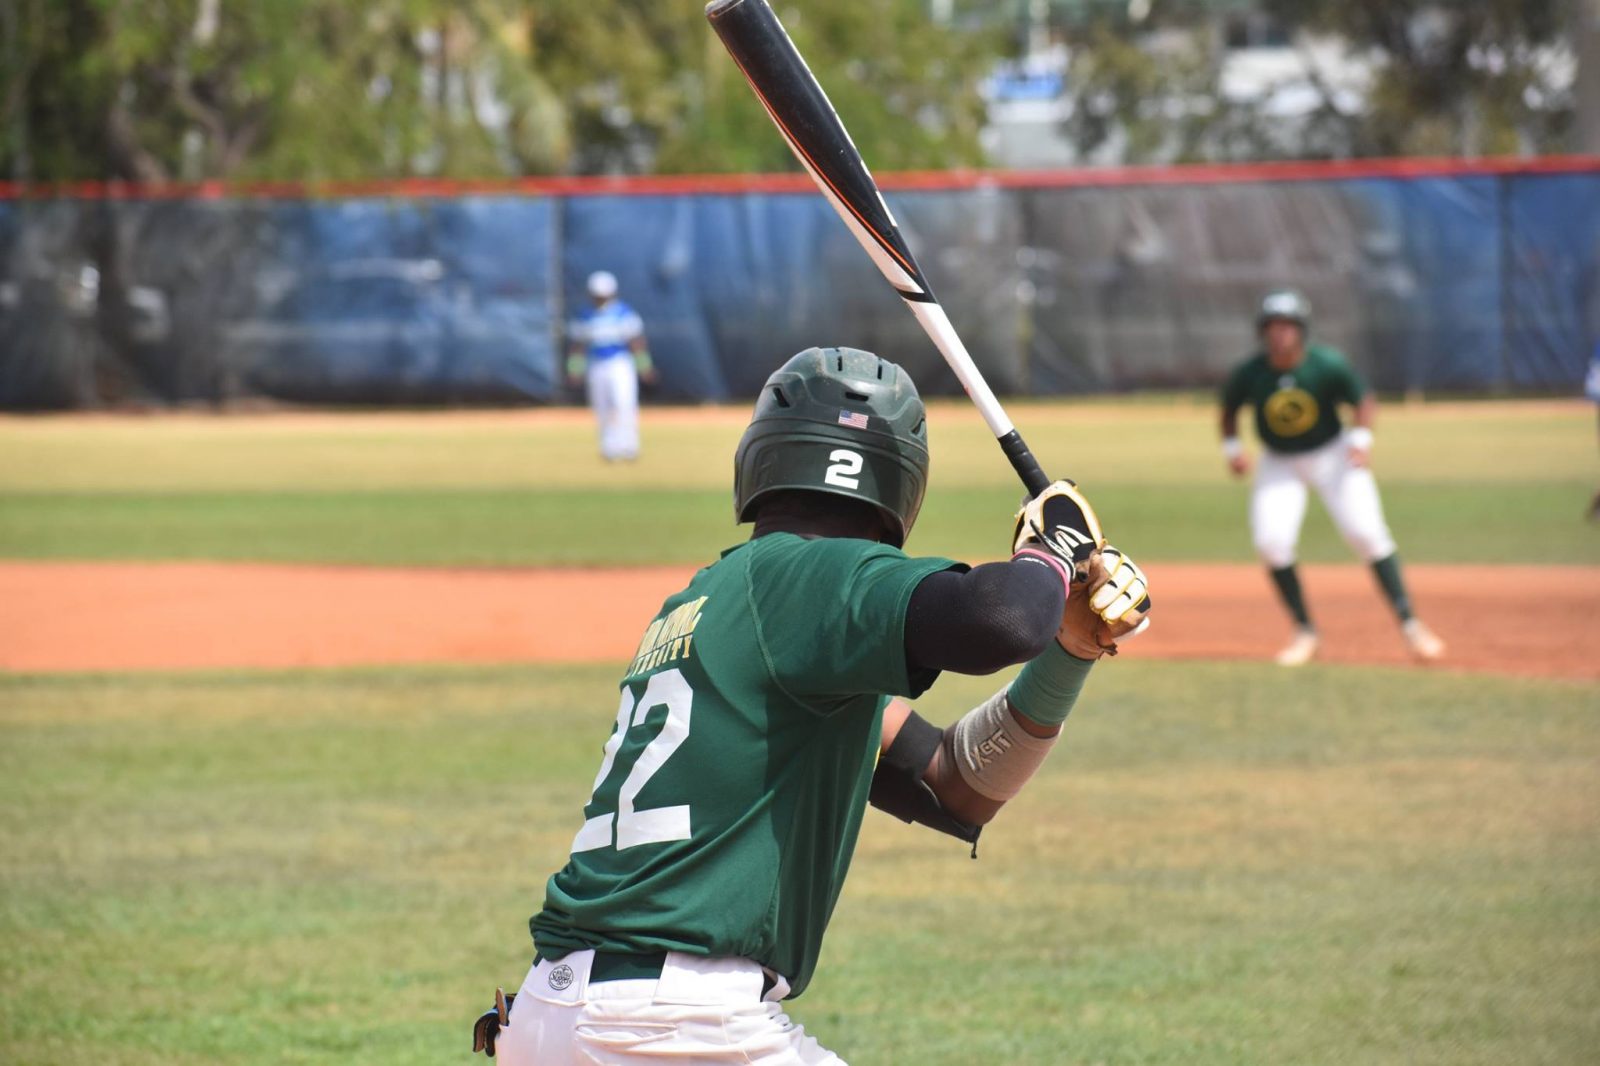 FNU Baseball player batting in the game